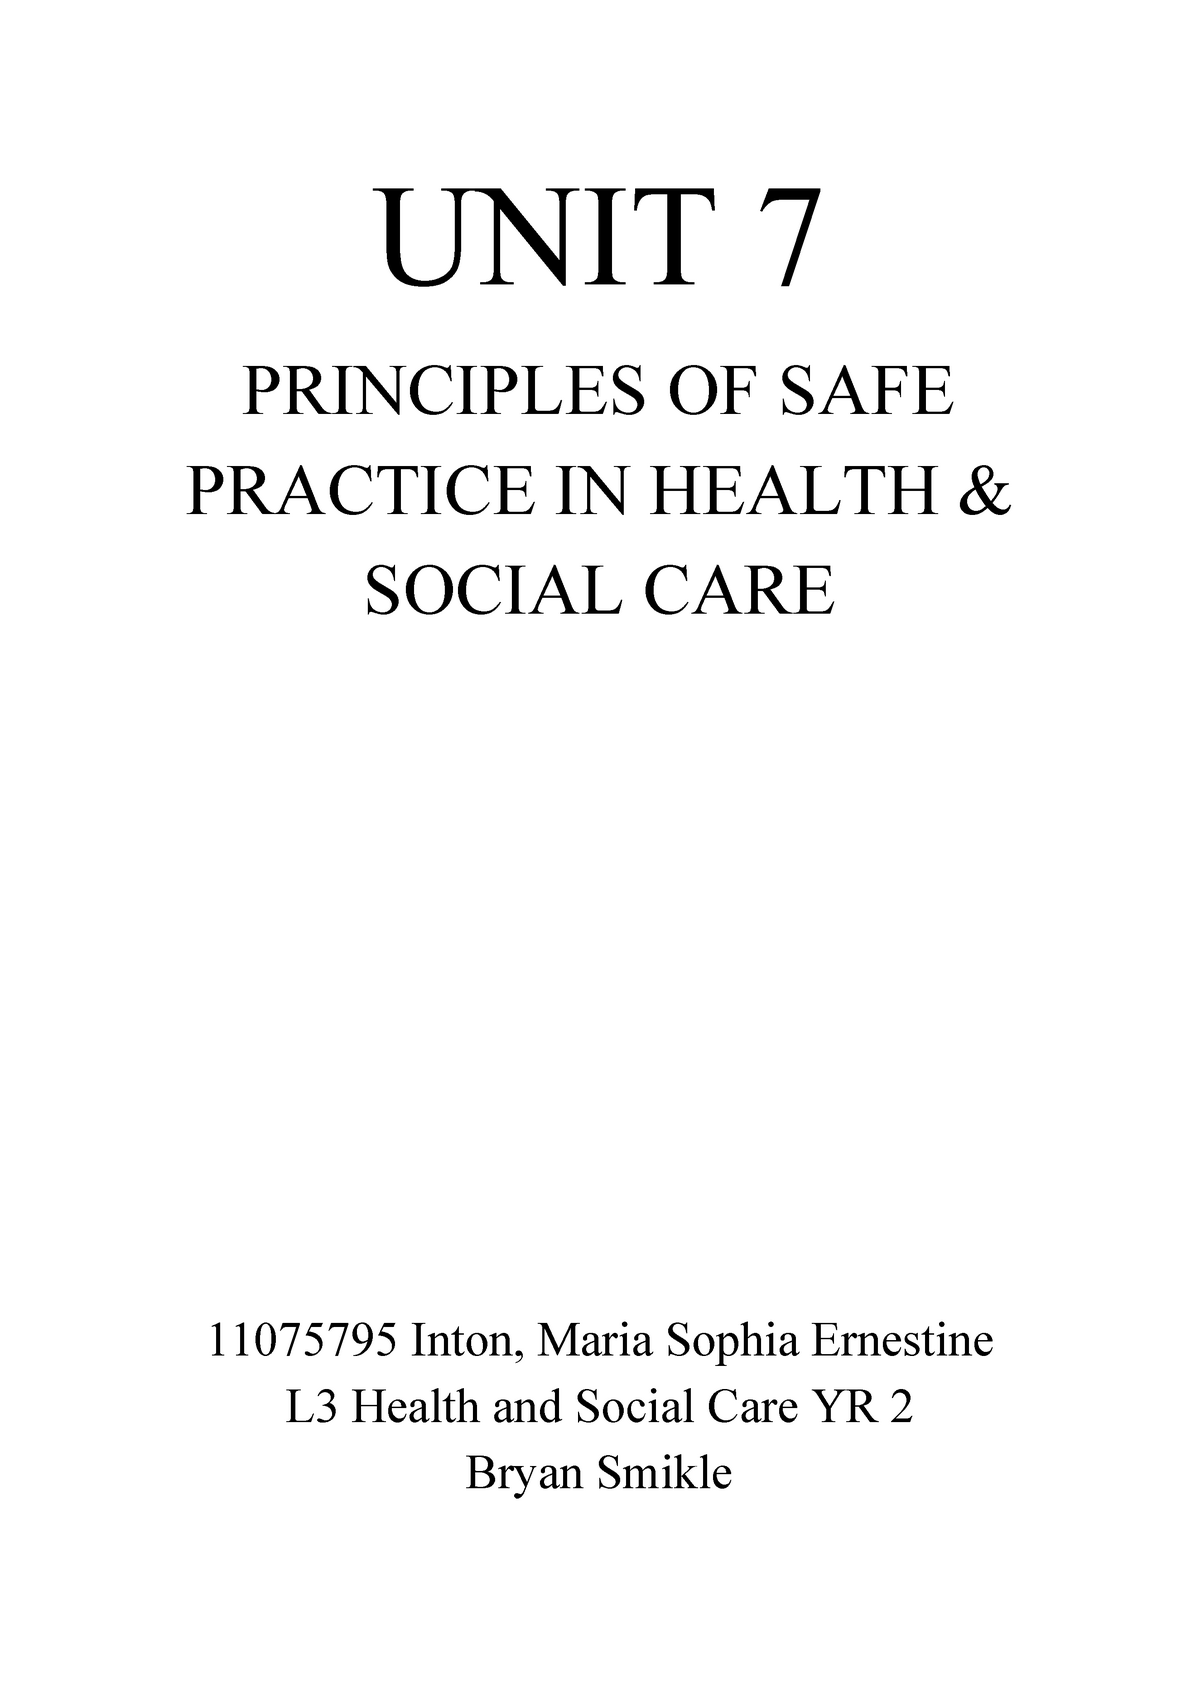 health and social care unit 7 assignment brief